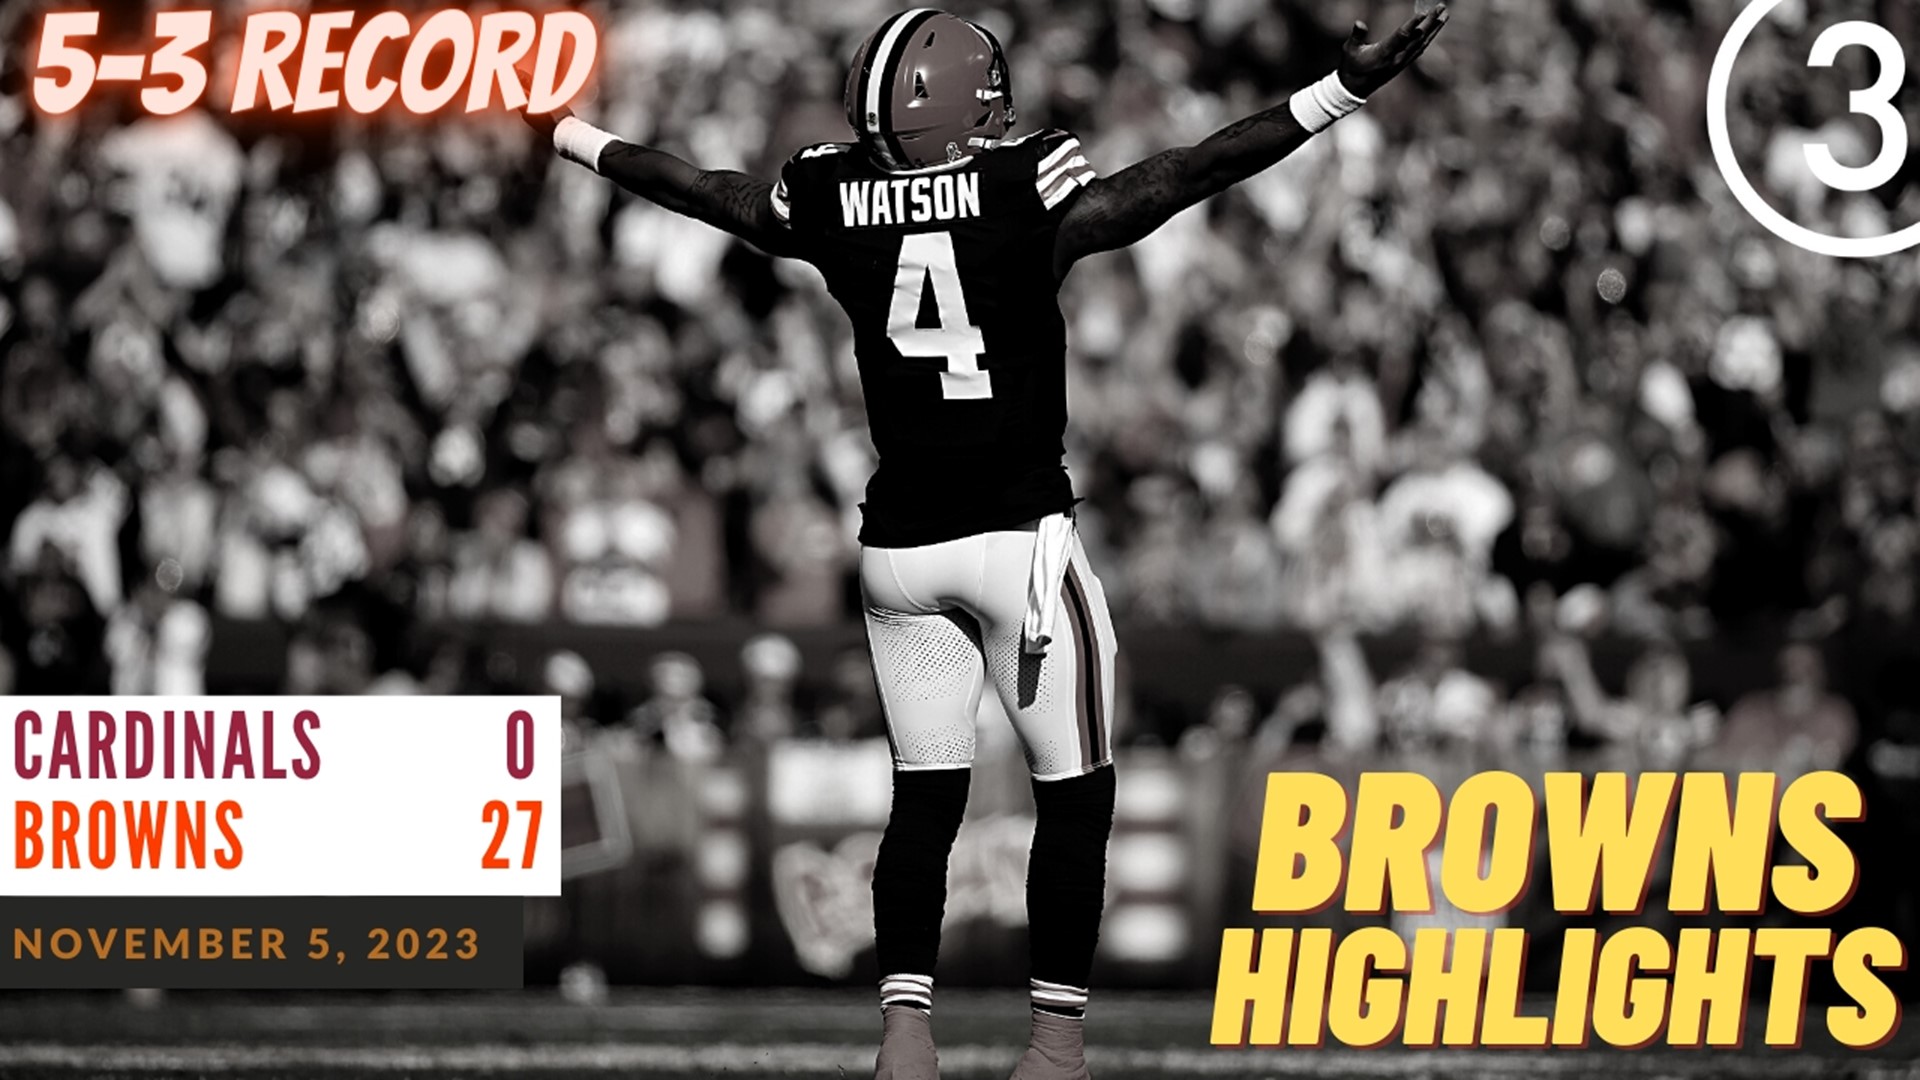 Cleveland Browns improve to 5-3 on the season with convincing win over the Arizona Cardinals